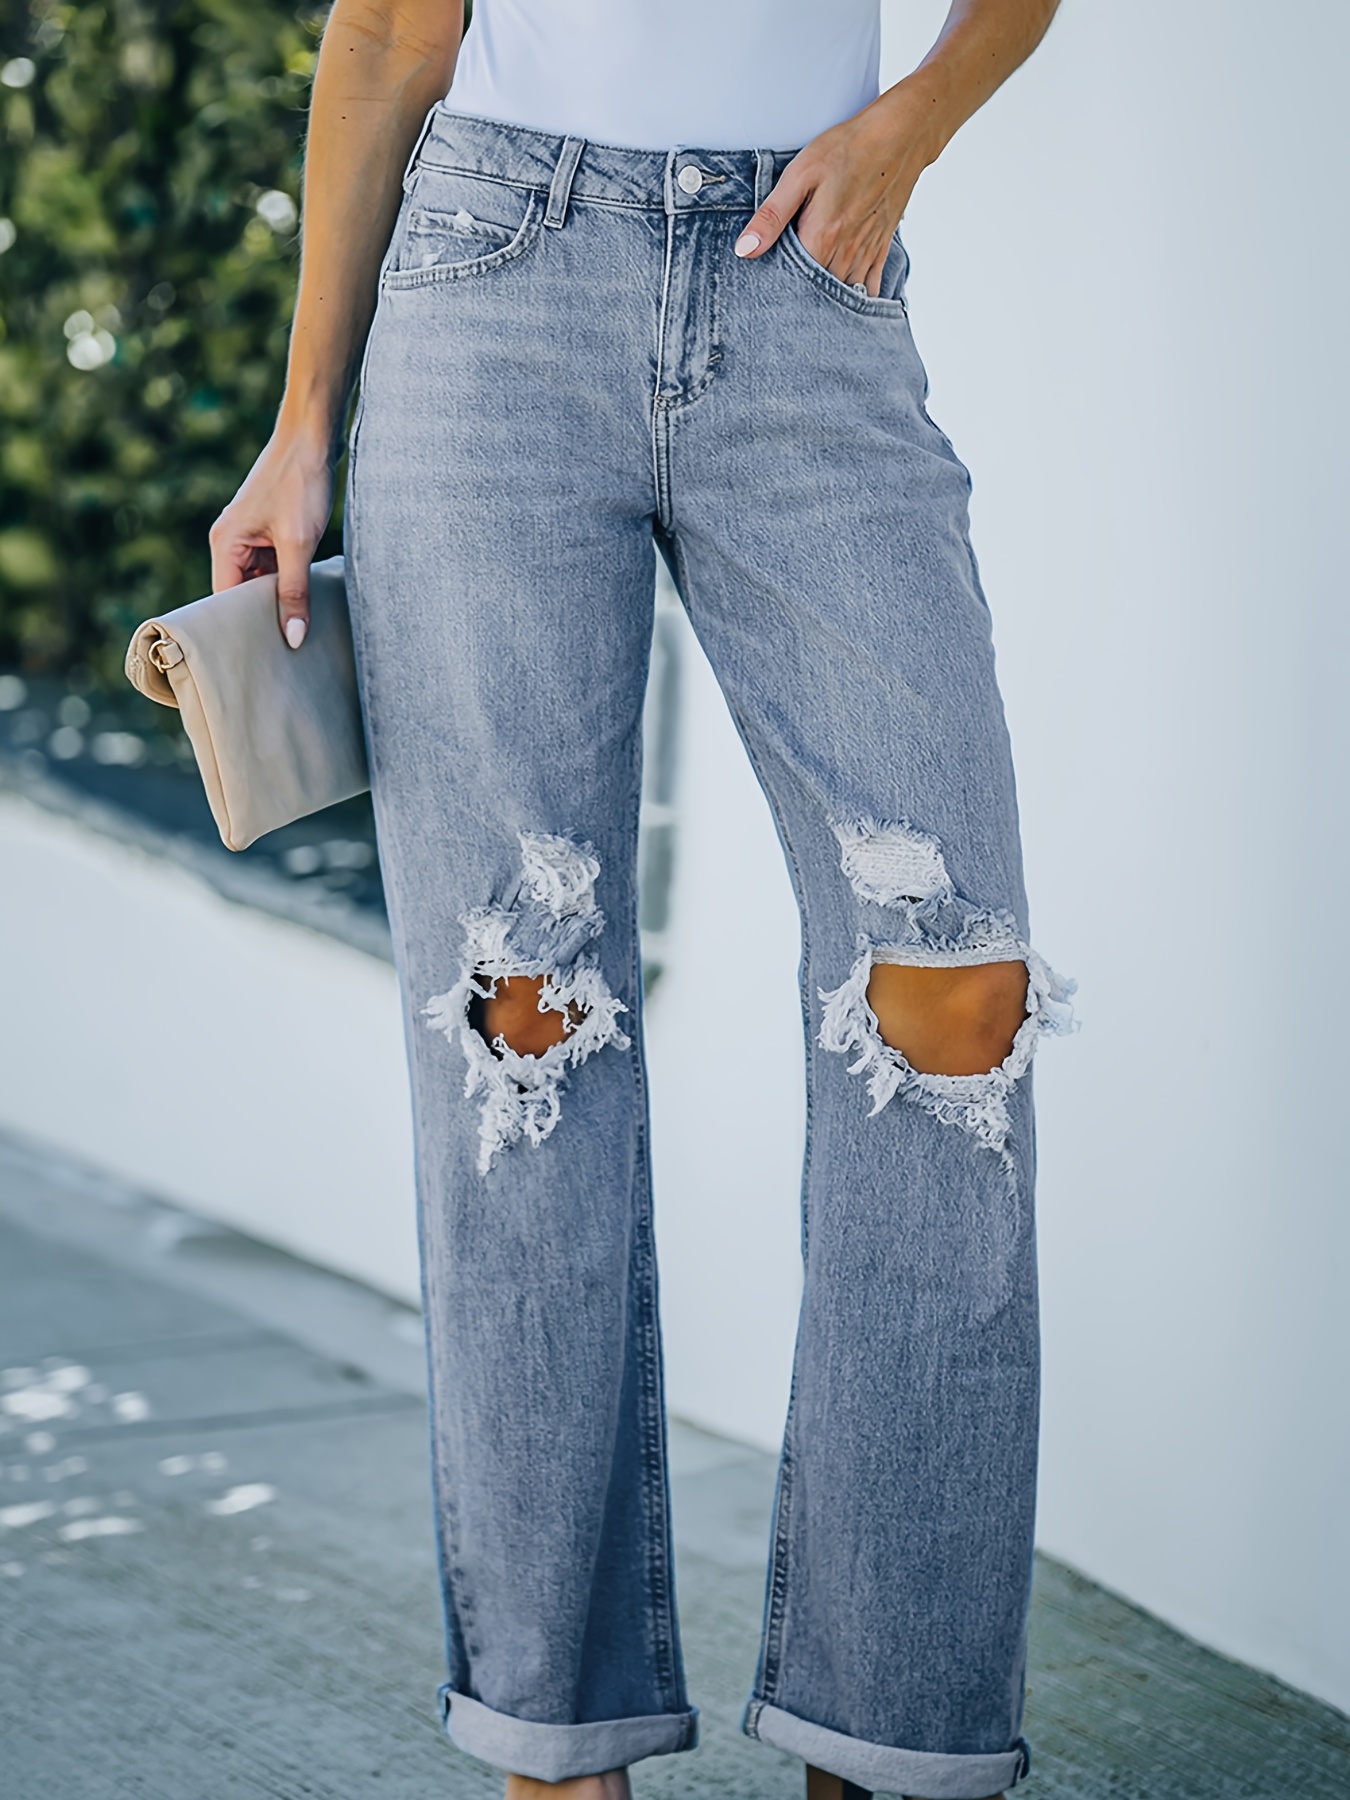 Women Loose Ripped Boyfriends Jeans High Waist Baggy Denim Pants Classic  Distressed Wide Leg Jeans Mom Jeans Trousers 